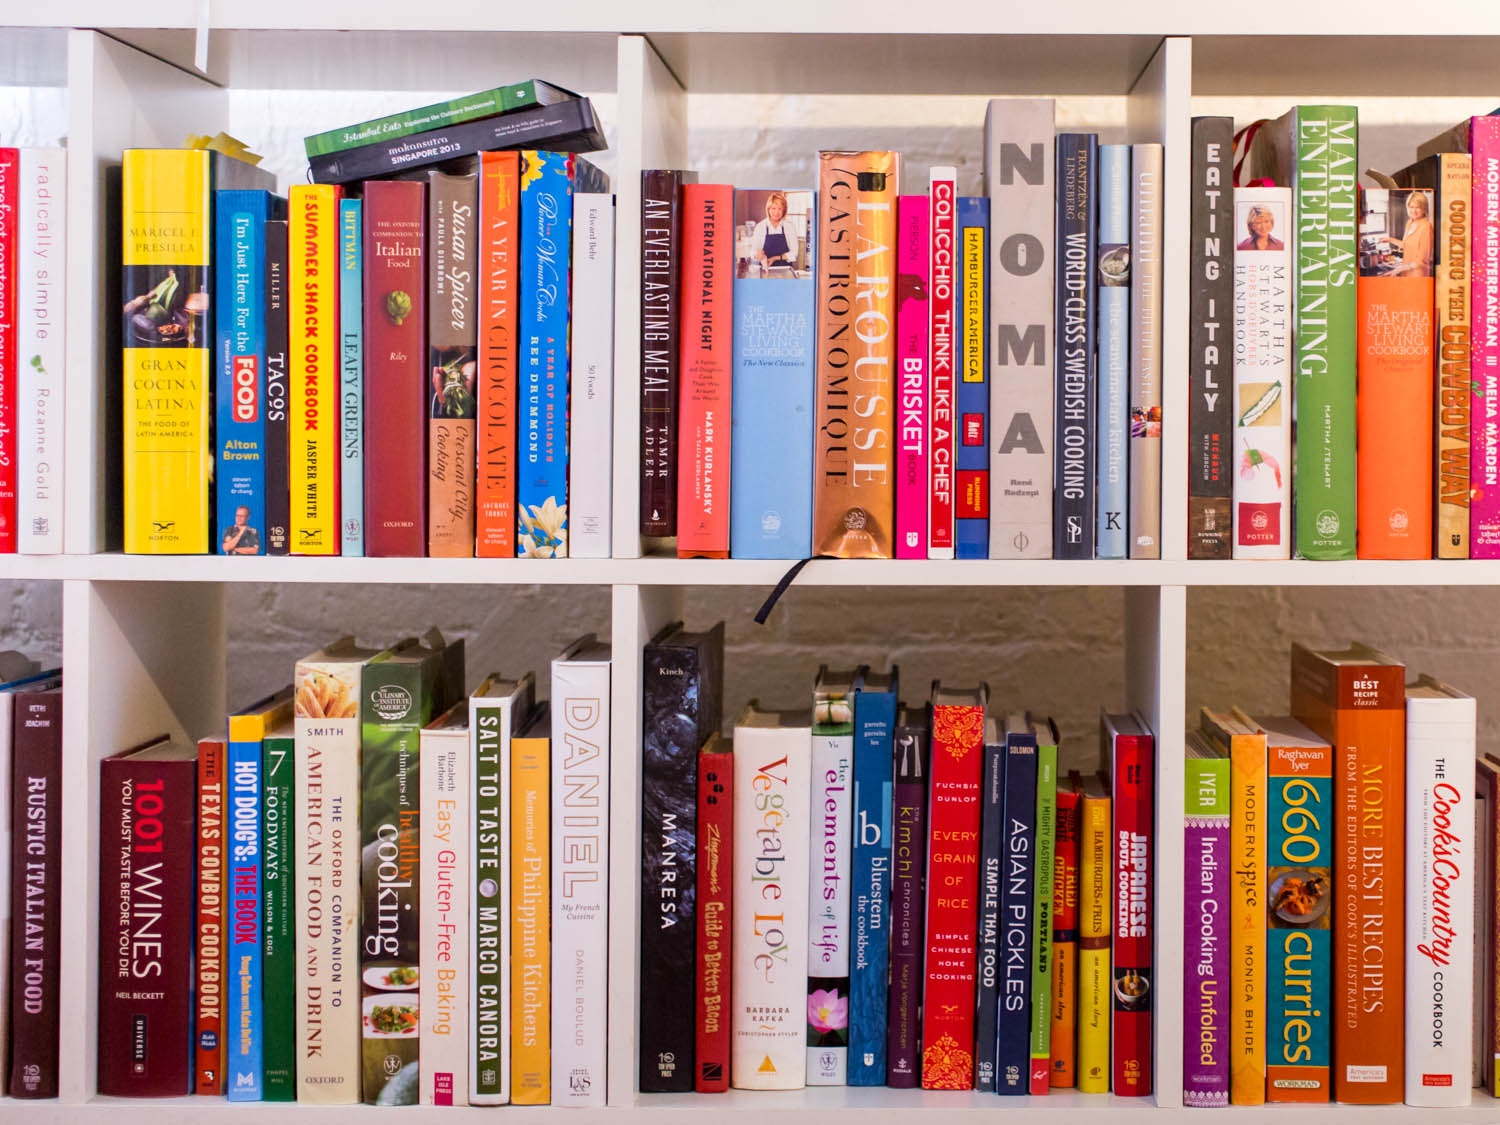 Frontlist | 12 best cookbooks of 2020 every cooking lover should read